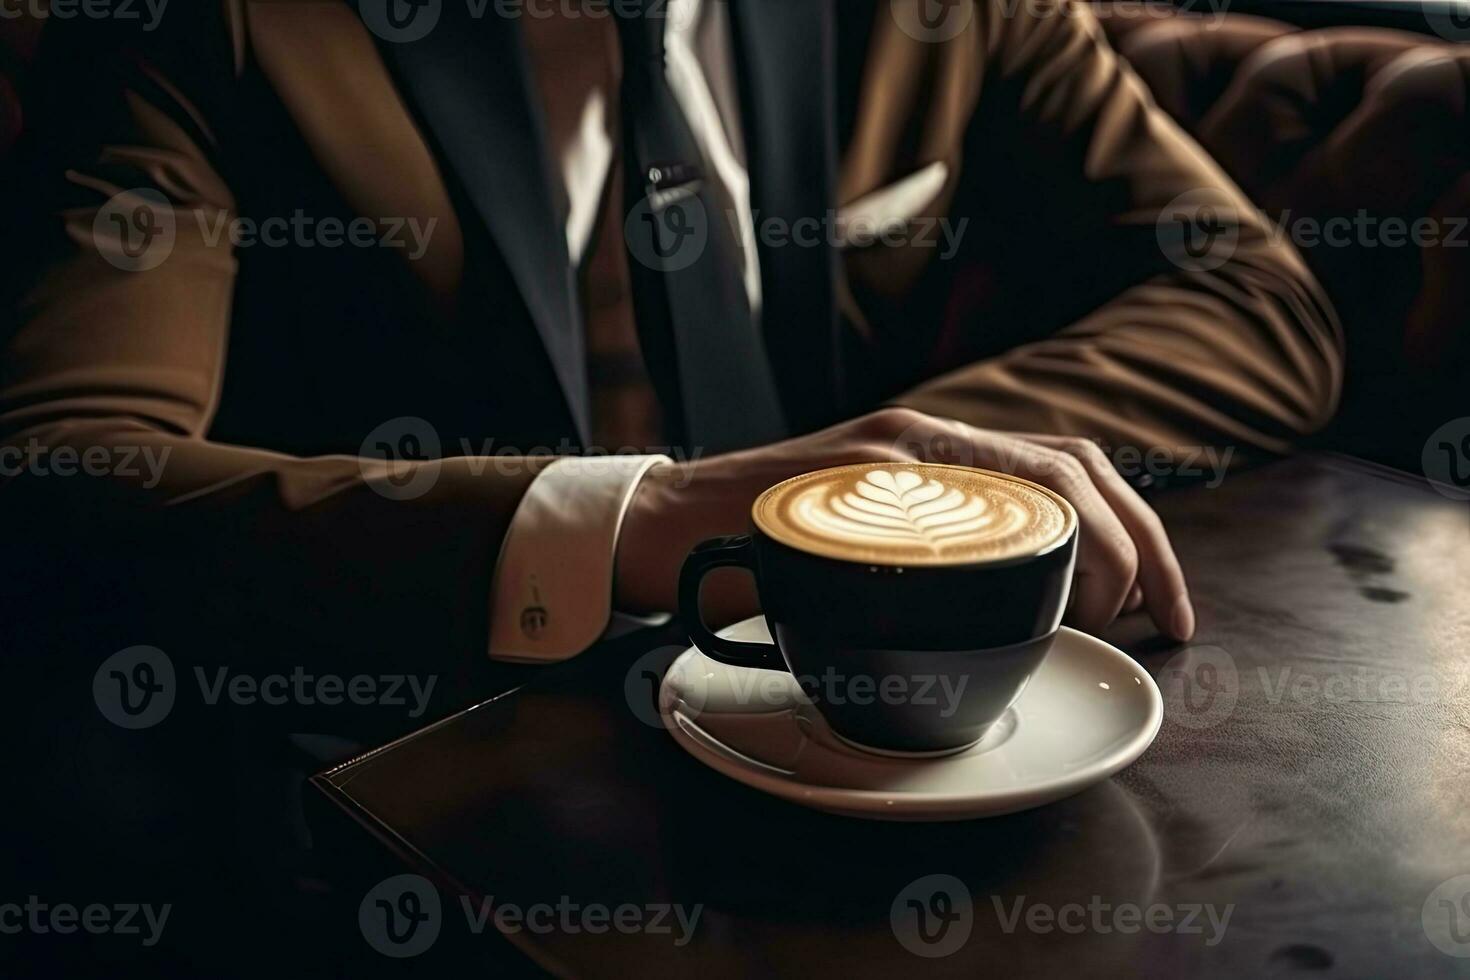 https://static.vecteezy.com/system/resources/previews/023/981/134/non_2x/close-up-young-man-in-work-clothes-with-hot-coffee-in-a-cafe-photo.jpeg